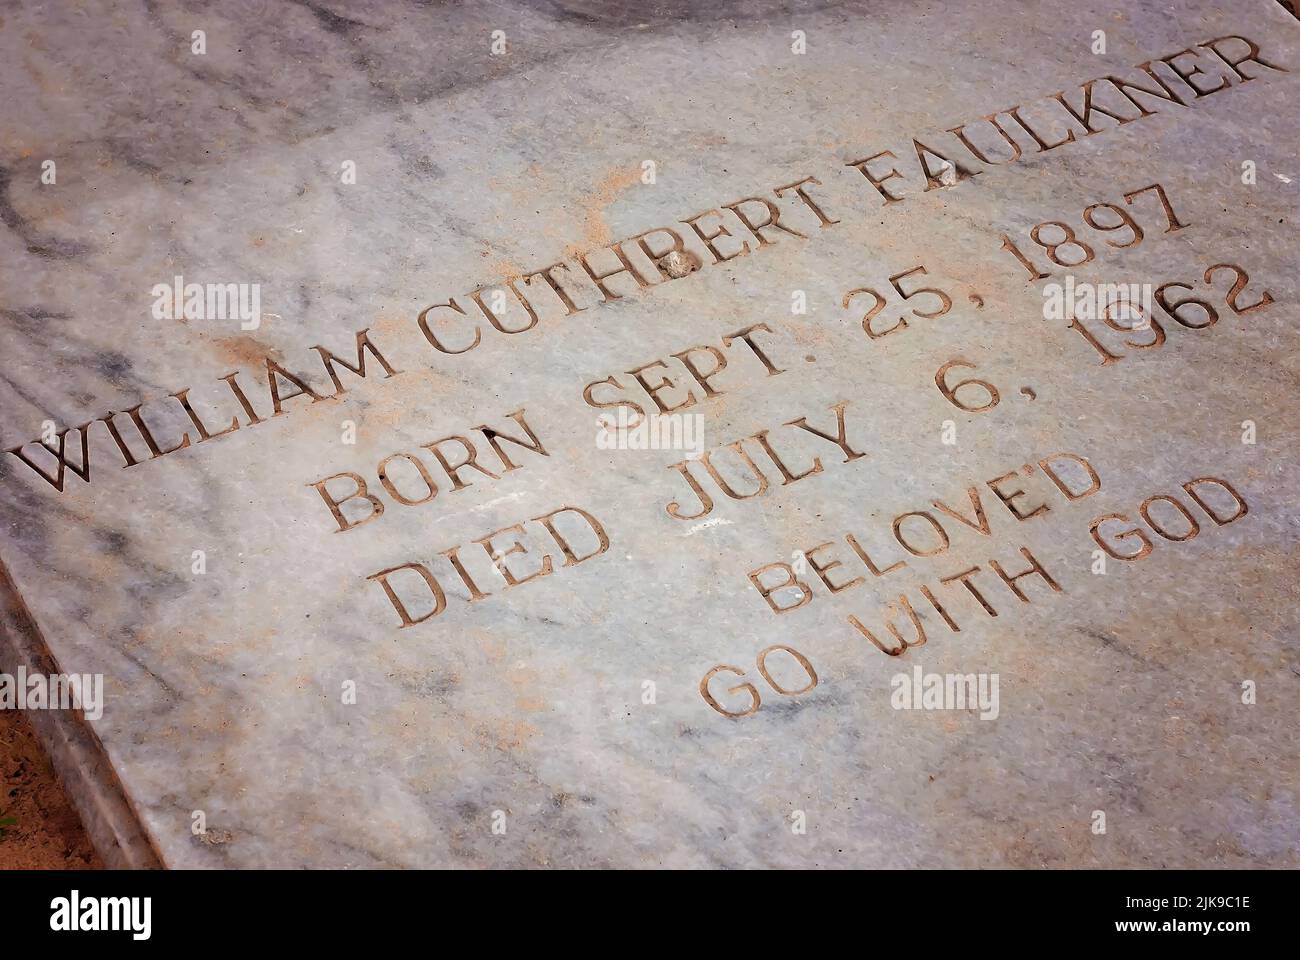 William Faulkner’s grave is pictured, July 17, 2011, in Oxford, Mississippi. Faulkner is a famous Southern author. Stock Photo